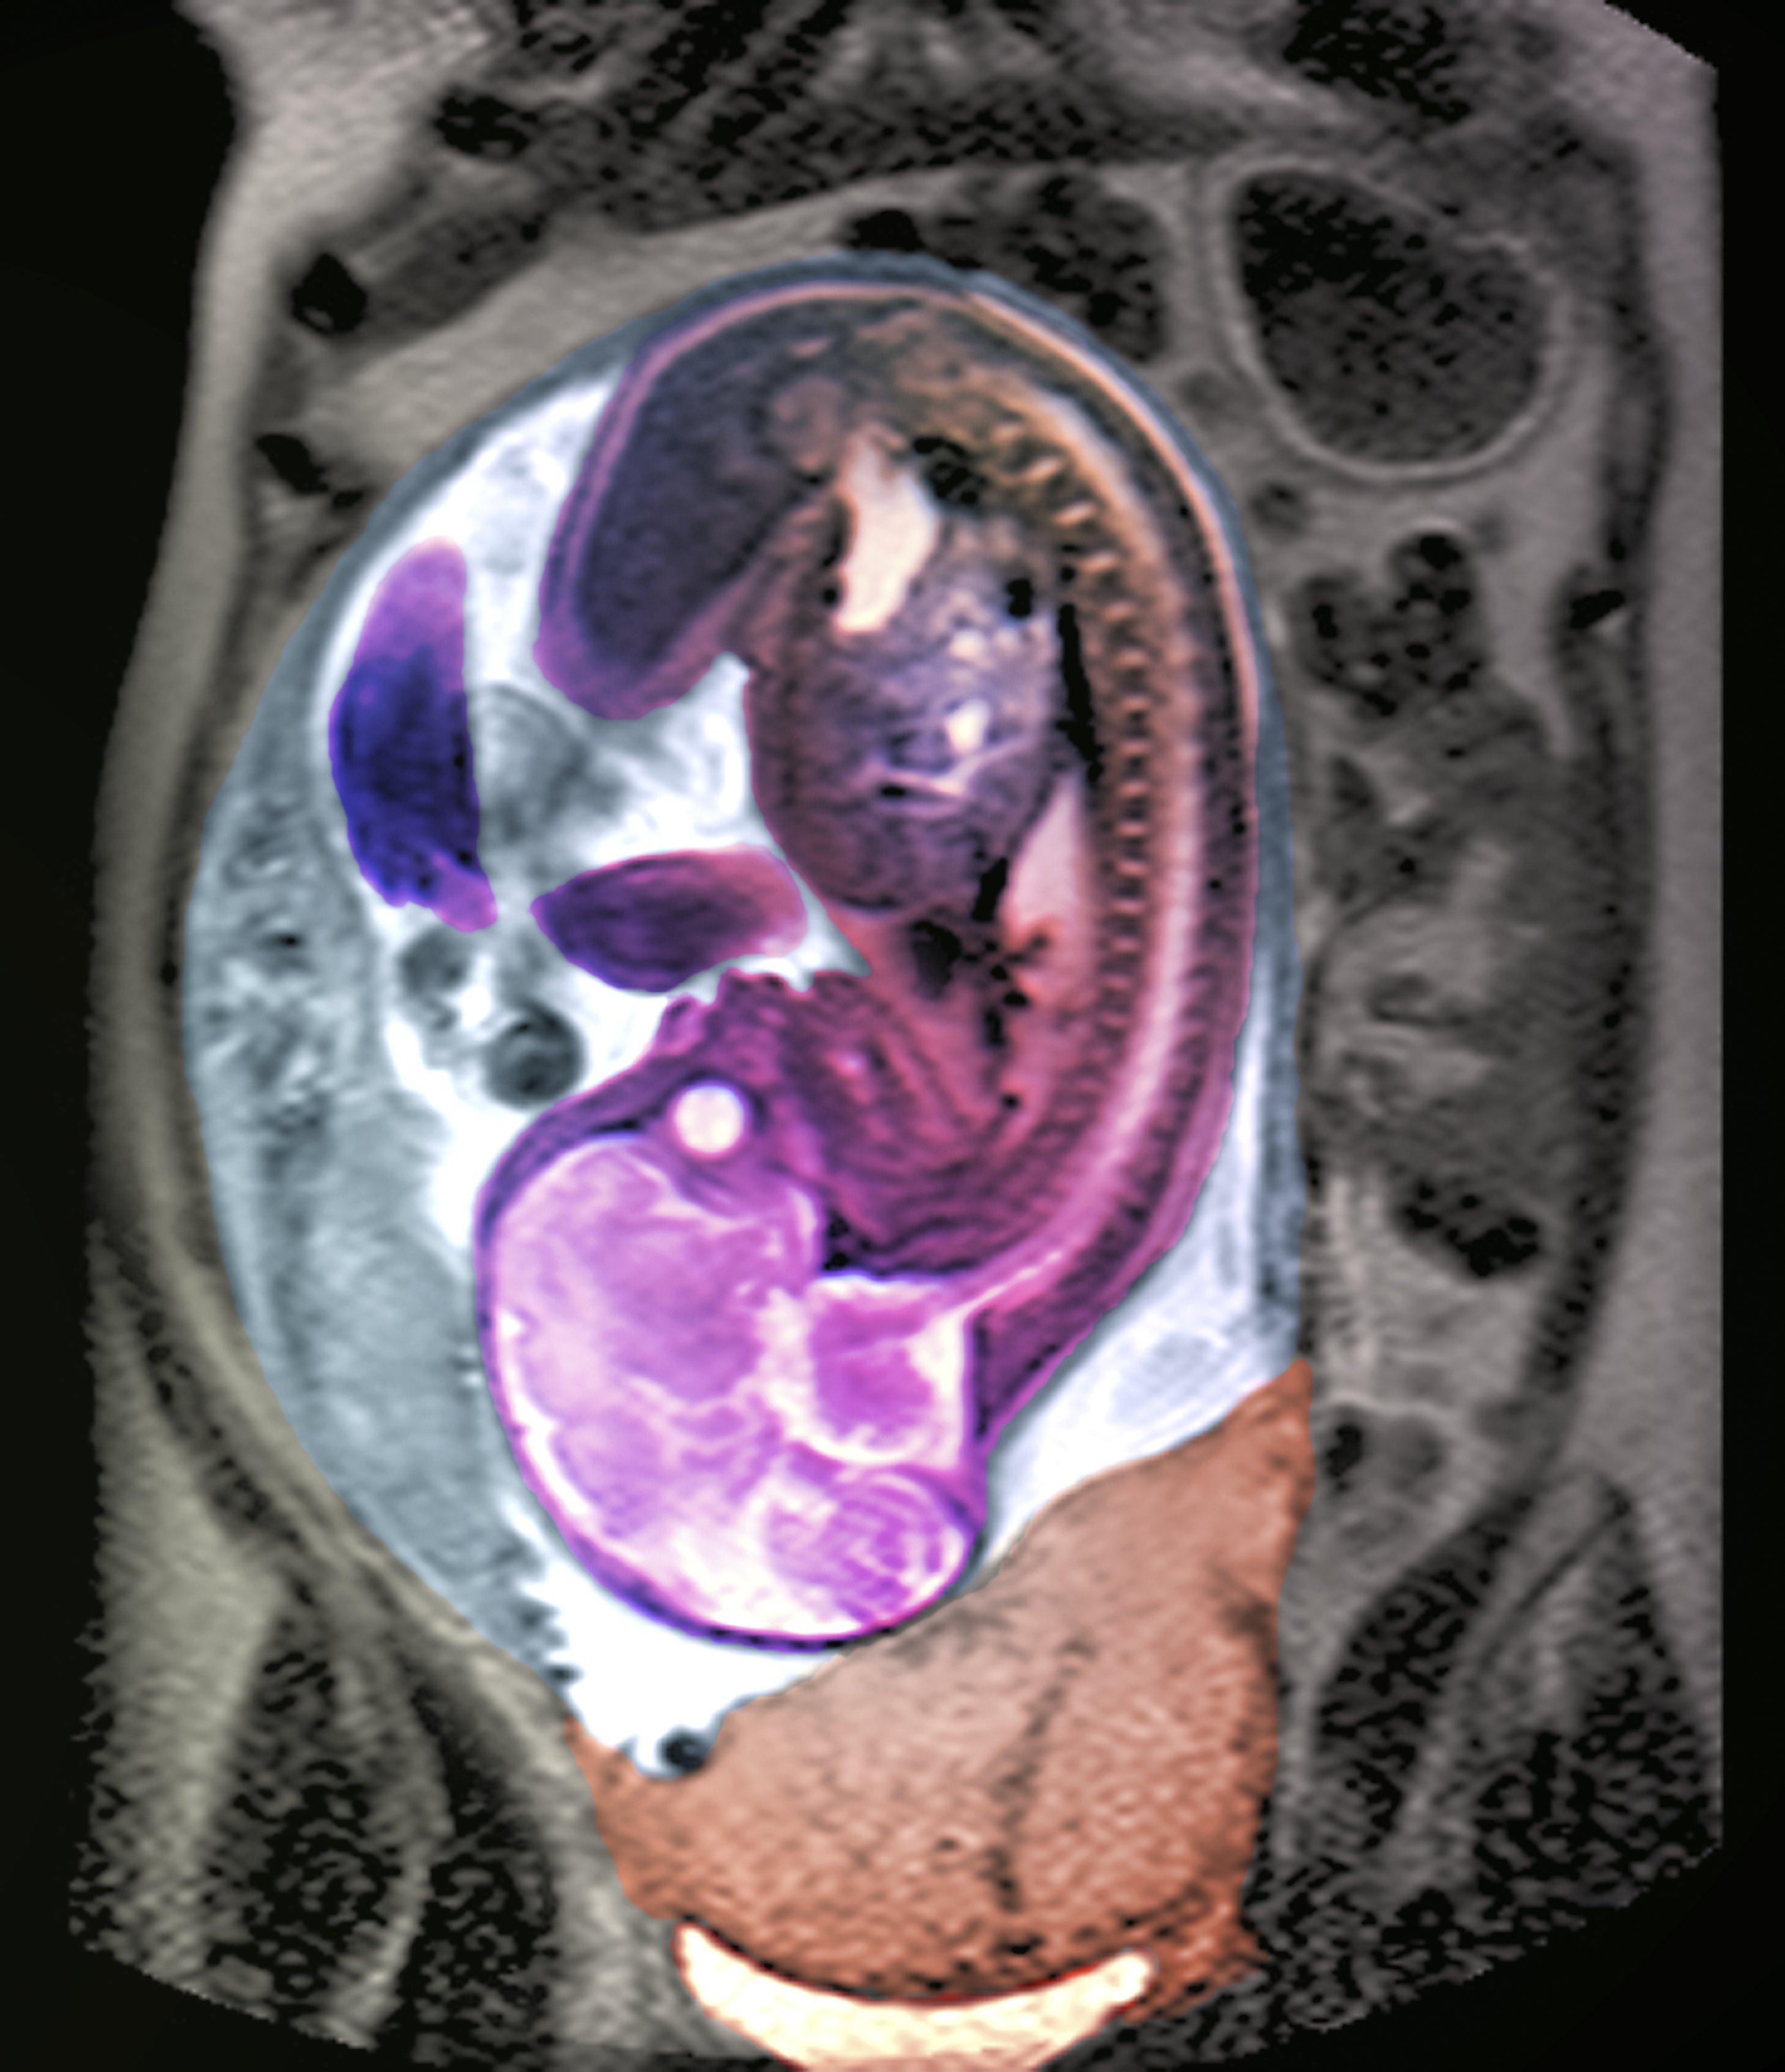 Coloured pelvic <a  href='/glossary/m#magnetic-resonance-imaging' data-toggle='popover' data-trigger='hover' title='magnetic resonance imaging' data-content='1542' >magnetic resonance imaging</a> (<a  href='/glossary/m#magnetic-resonance-imaging' data-toggle='popover' data-trigger='hover' title='MRI' data-content='1542' >MRI</a>) scan of a pregnant woman with placenta praevia. The placenta (lower centre) is blocking the <a  href='/glossary/c#cervix' data-toggle='popover' data-trigger='hover' title='cervix' data-content='1511' >cervix</a>, the exit to the womb. The fetus is in &#39;head down&#39; position (the brain can be seen, lower left).